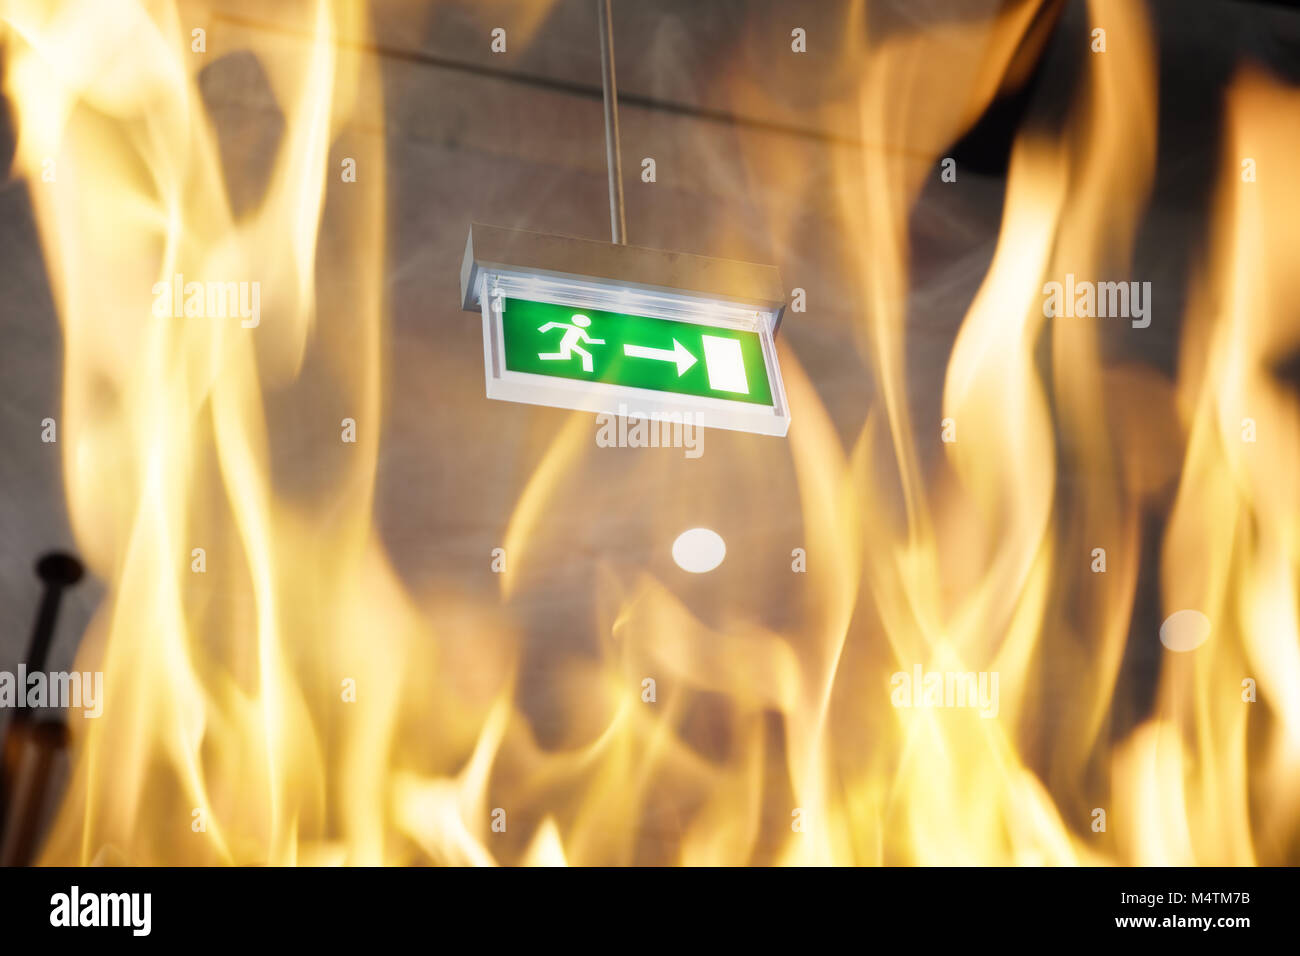 Low angle view of fire against emergency exit sign in building Stock Photo